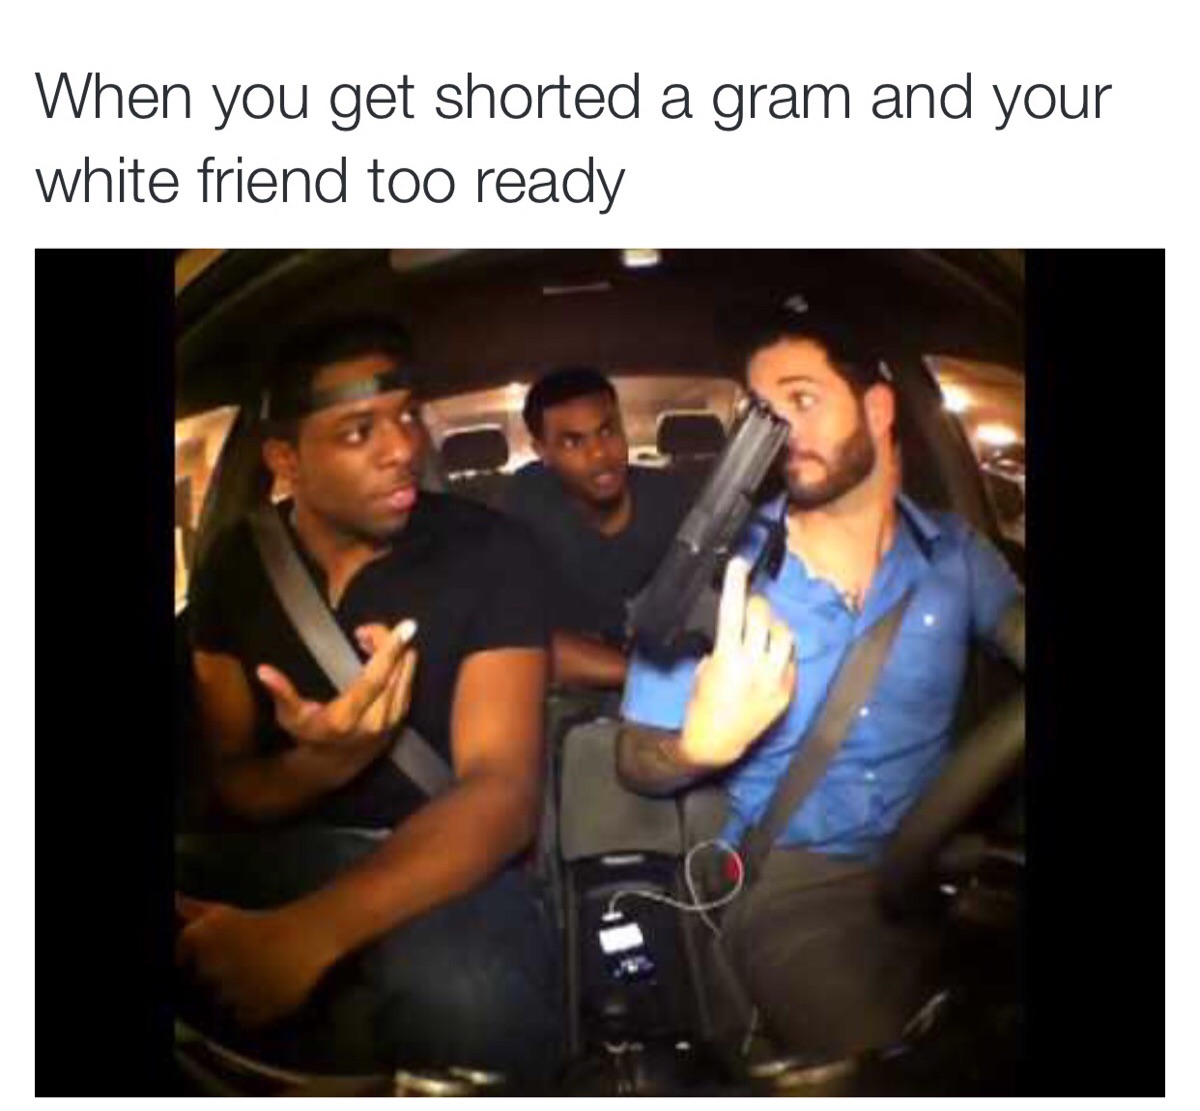 fun - When you get shorted a gram and your white friend too ready